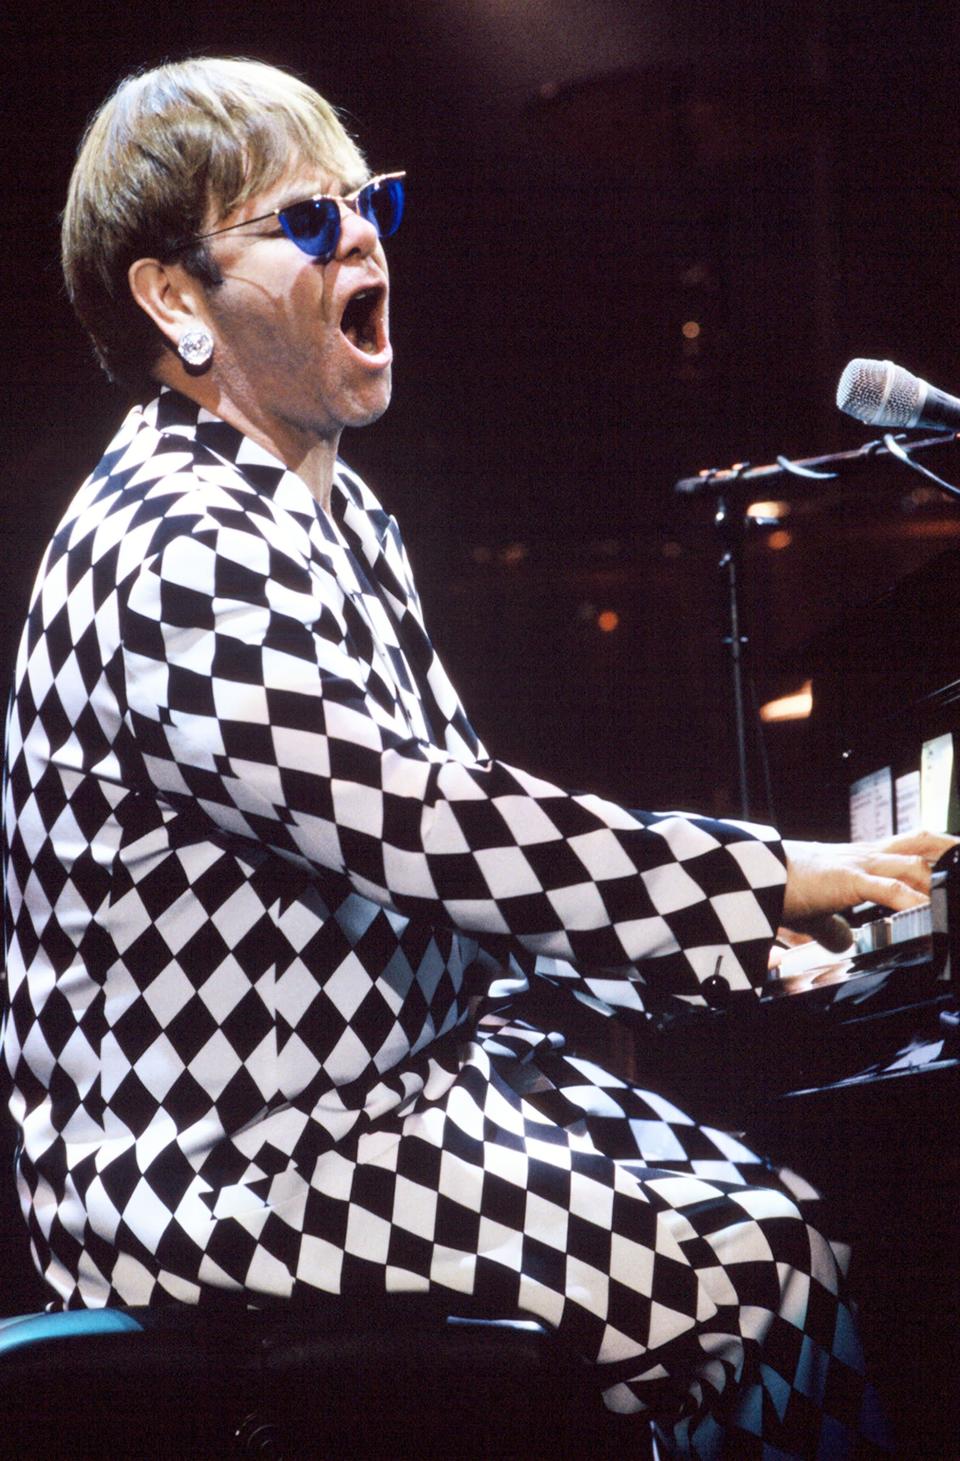 <p>Elton John had some of his most famous fashion moments onstage, and this checkerboard look complete with dazzling stud earrings and translucent blue lenses at Shoreline Ampitheatre in CA was particularly memorable.</p>